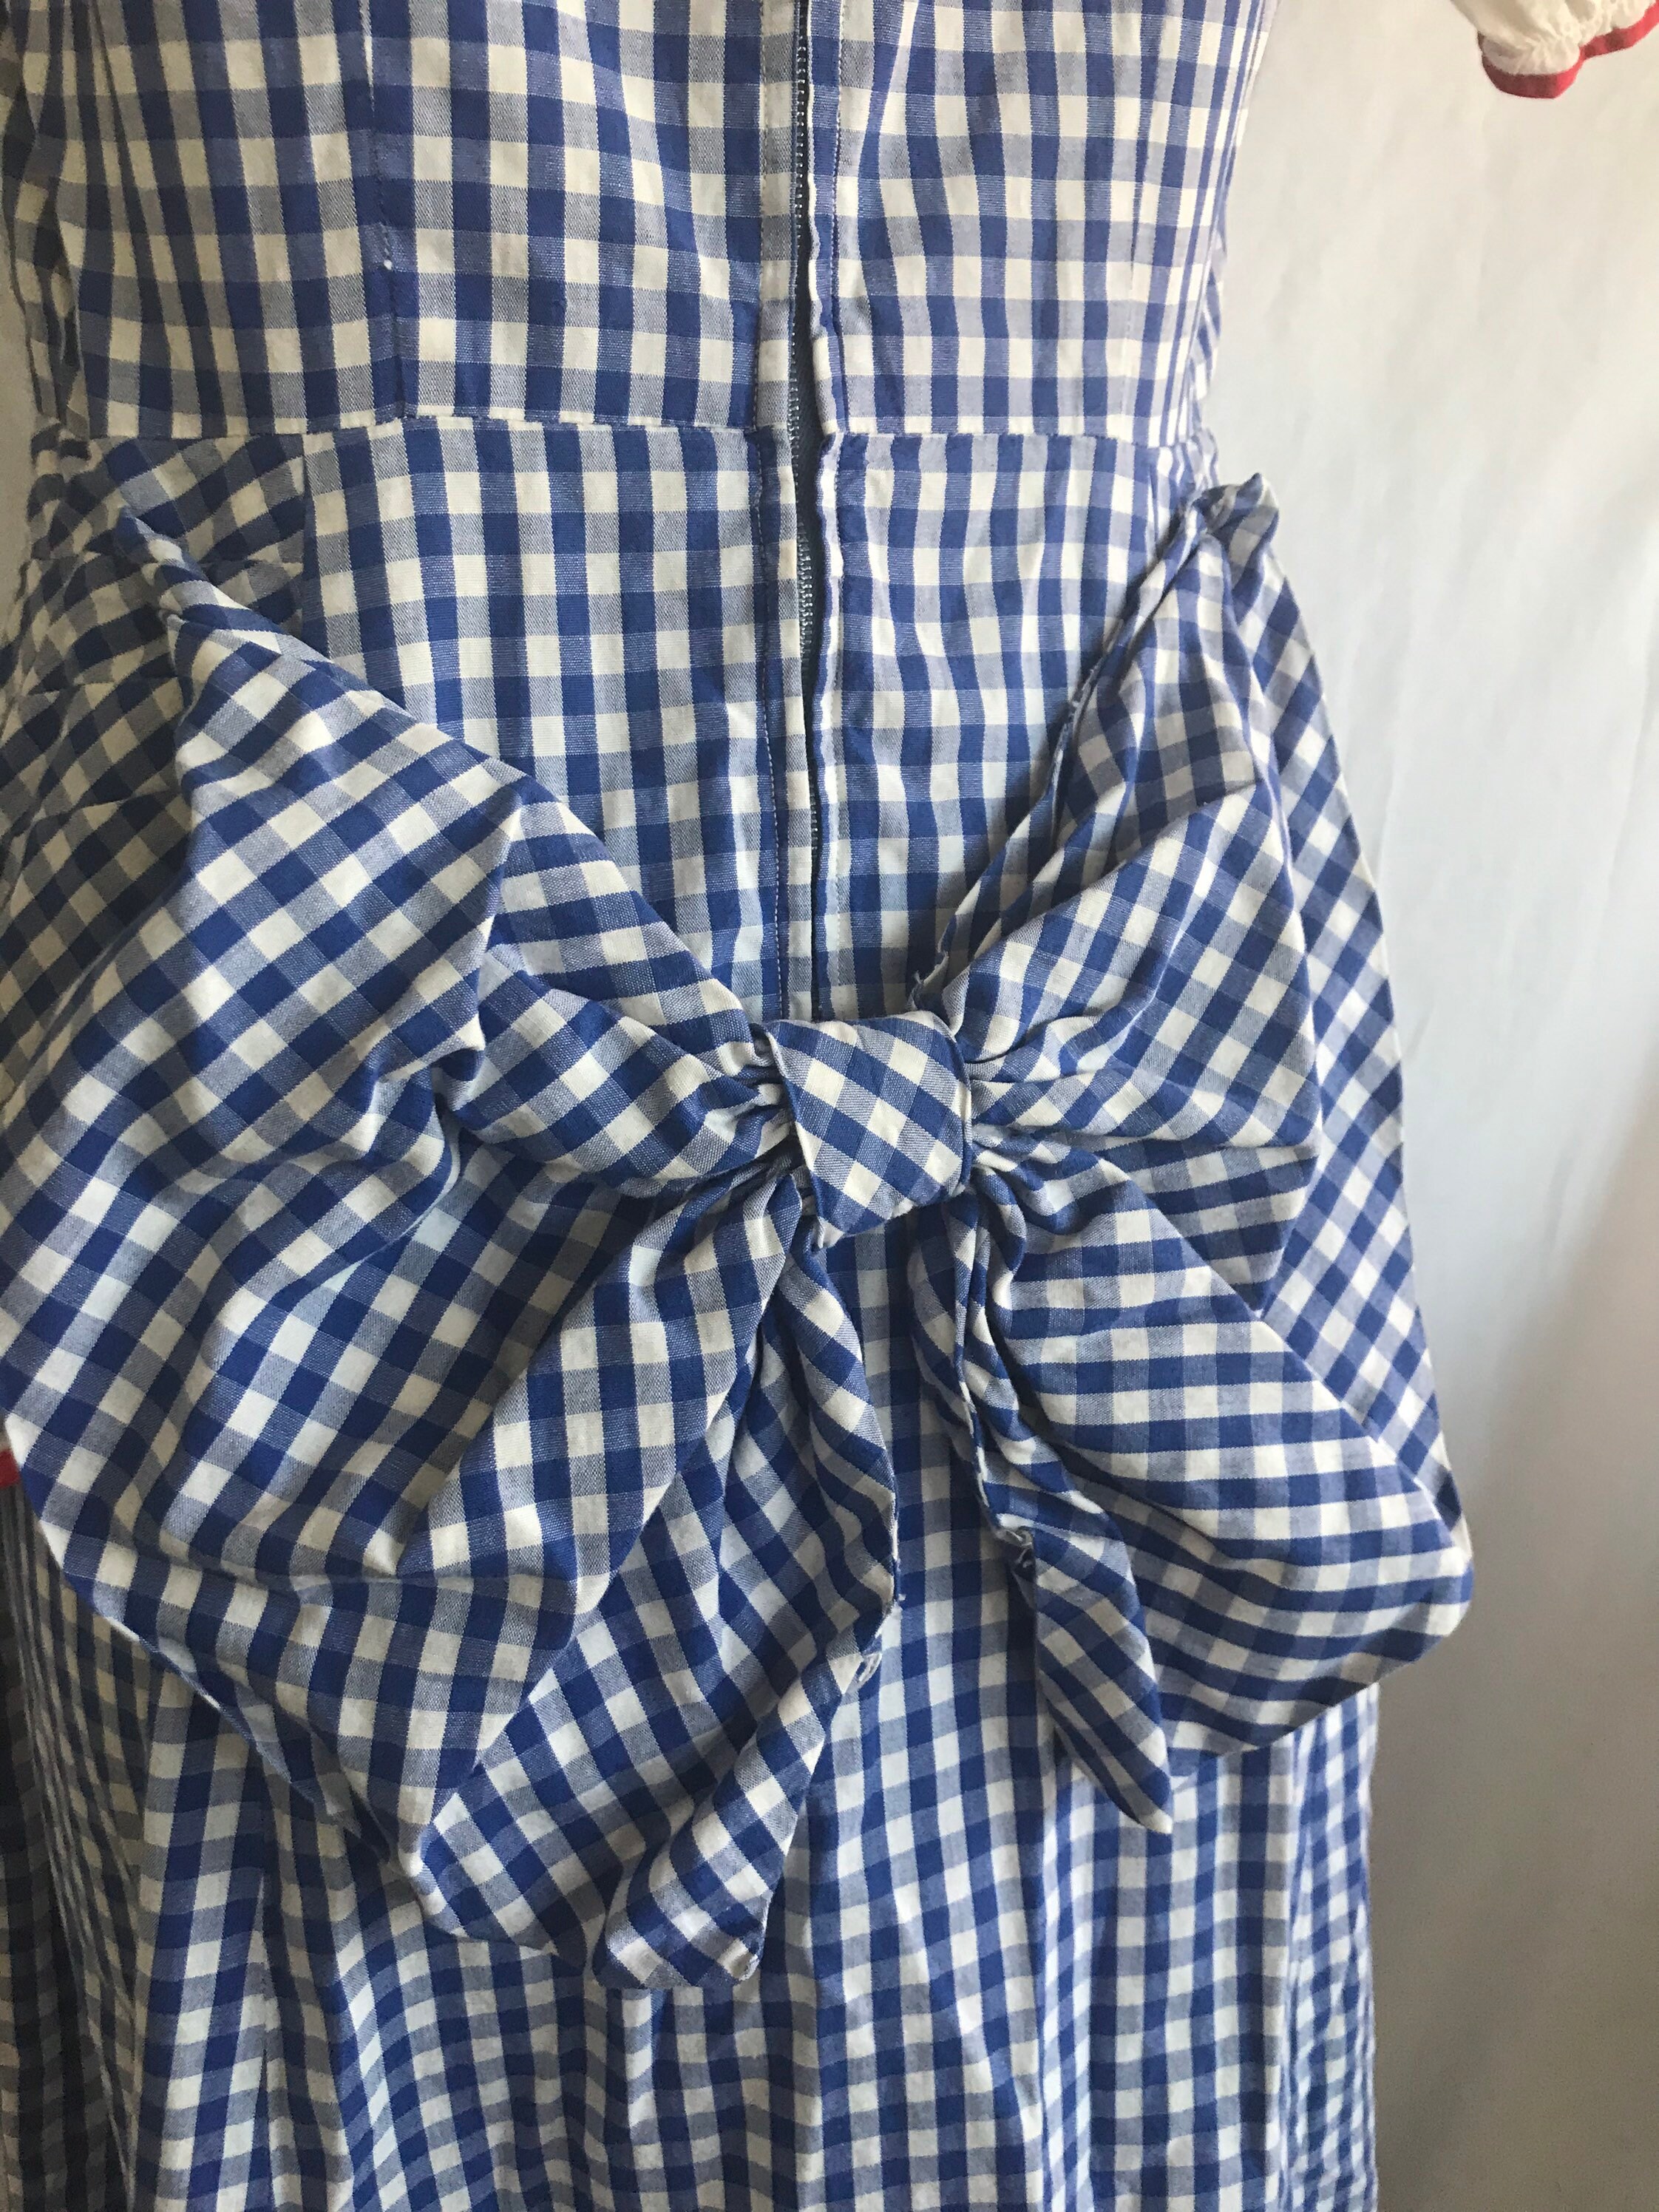 1940s Does 1880s Blue and White Cotton Gingham Peplum Bow | Etsy